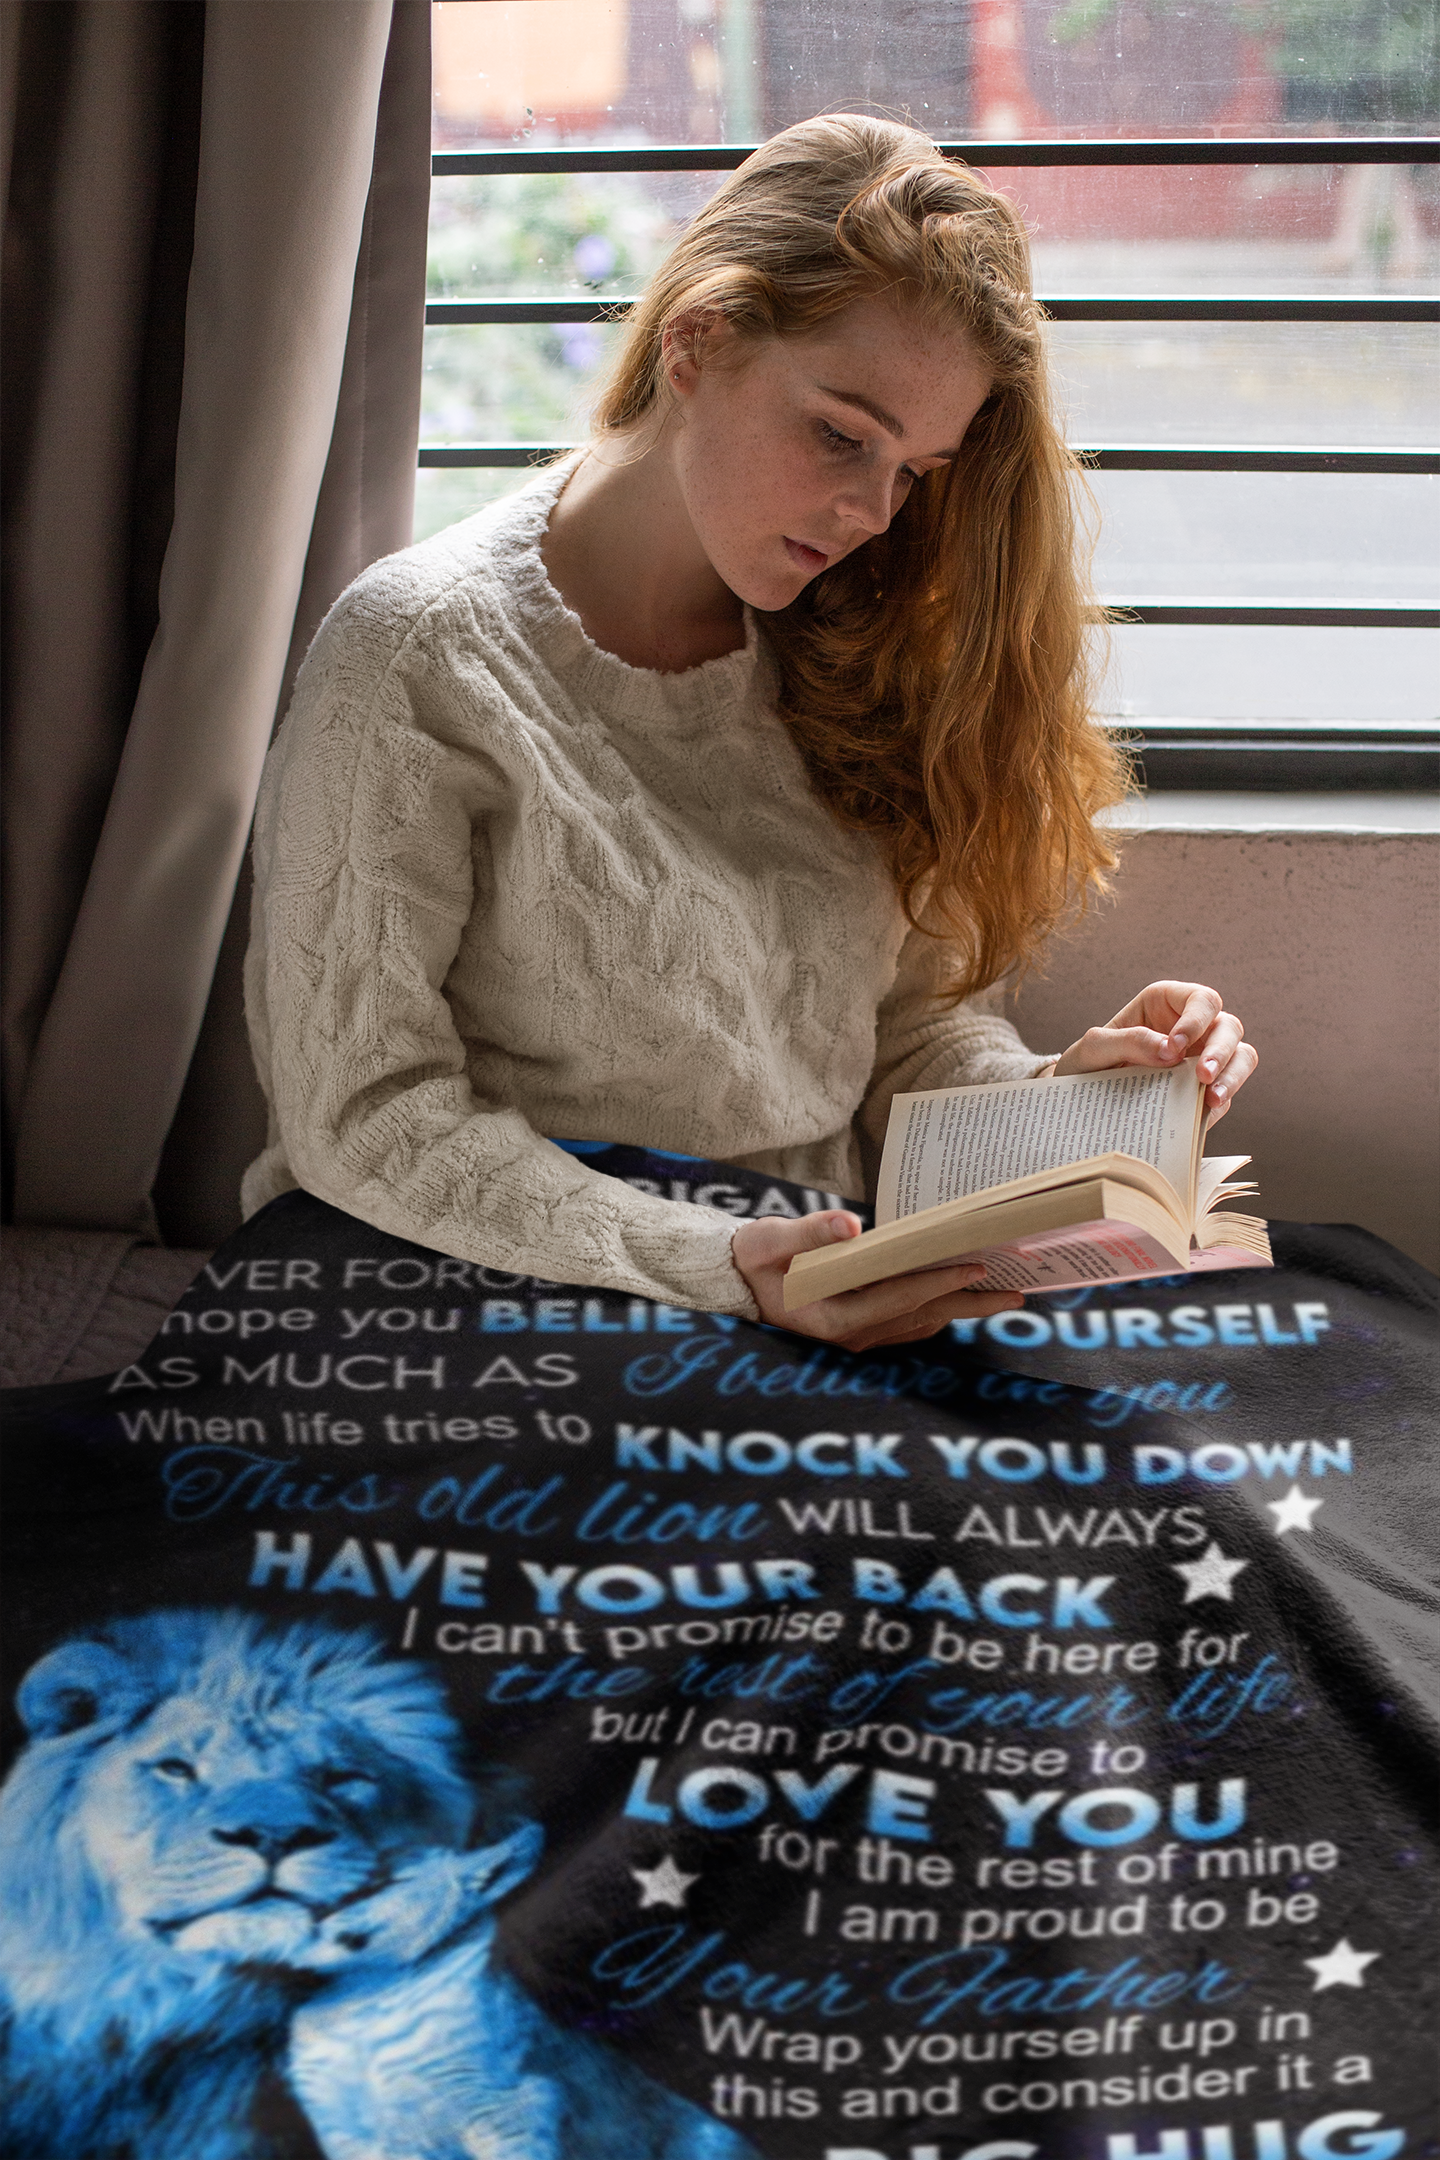 To My Daughter |  Lion Personalized Blanket